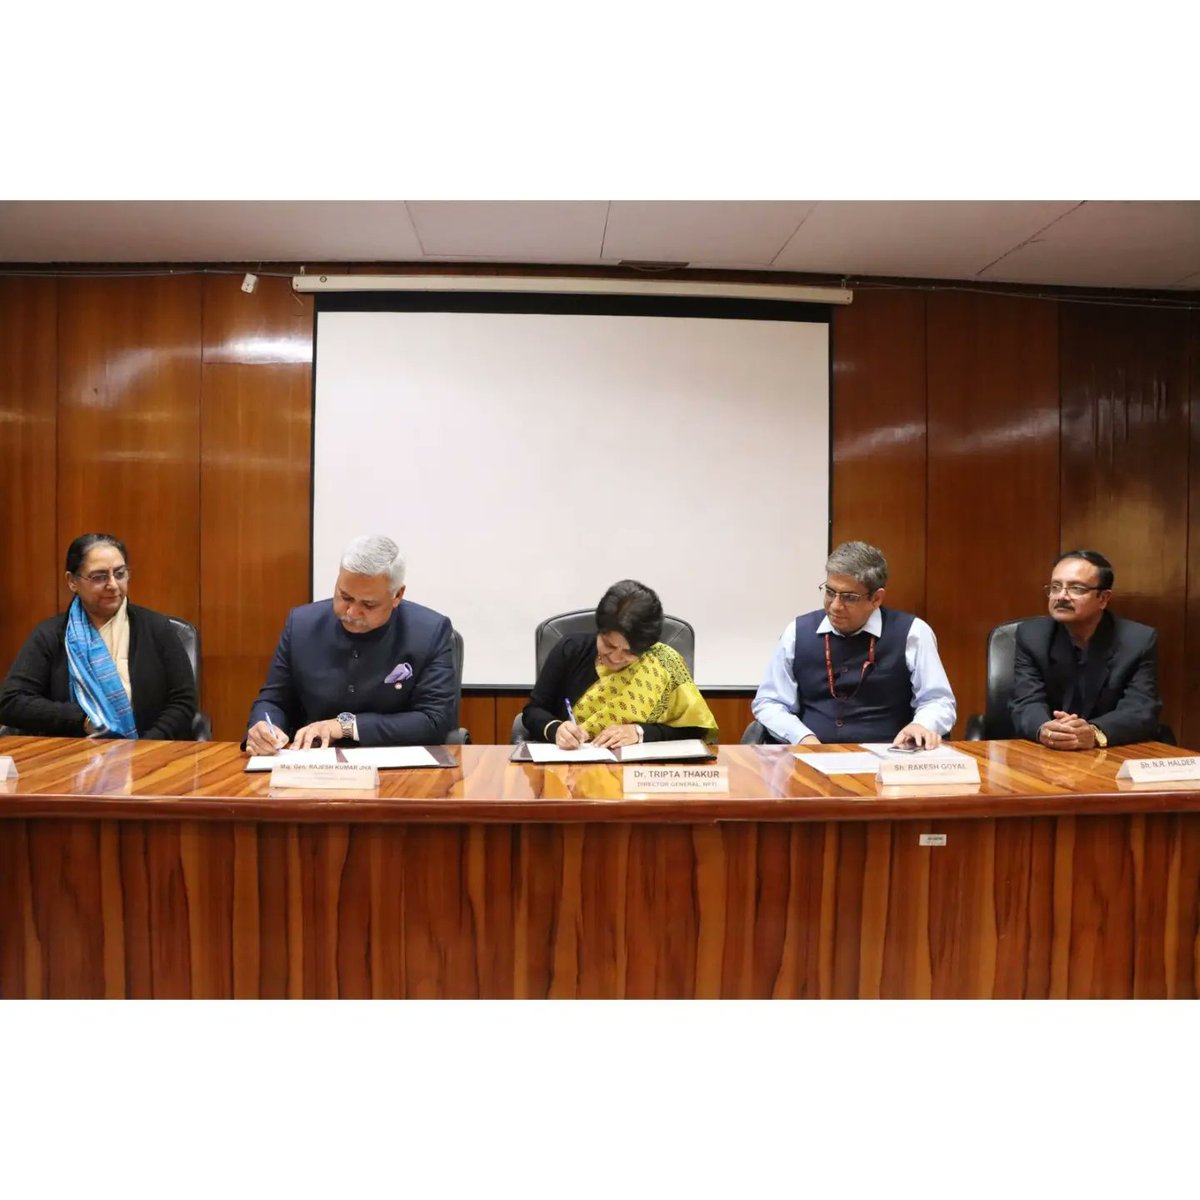 NPTI and NEEPCO, a wholly owned subsidiary of NTPC Ltd. entered in a Memorandum of Understanding for imparting training jointly for working professionals from NEEPCO in the area of Hydro, Thermal and Renewable Energy and other areas of mutual interest in India